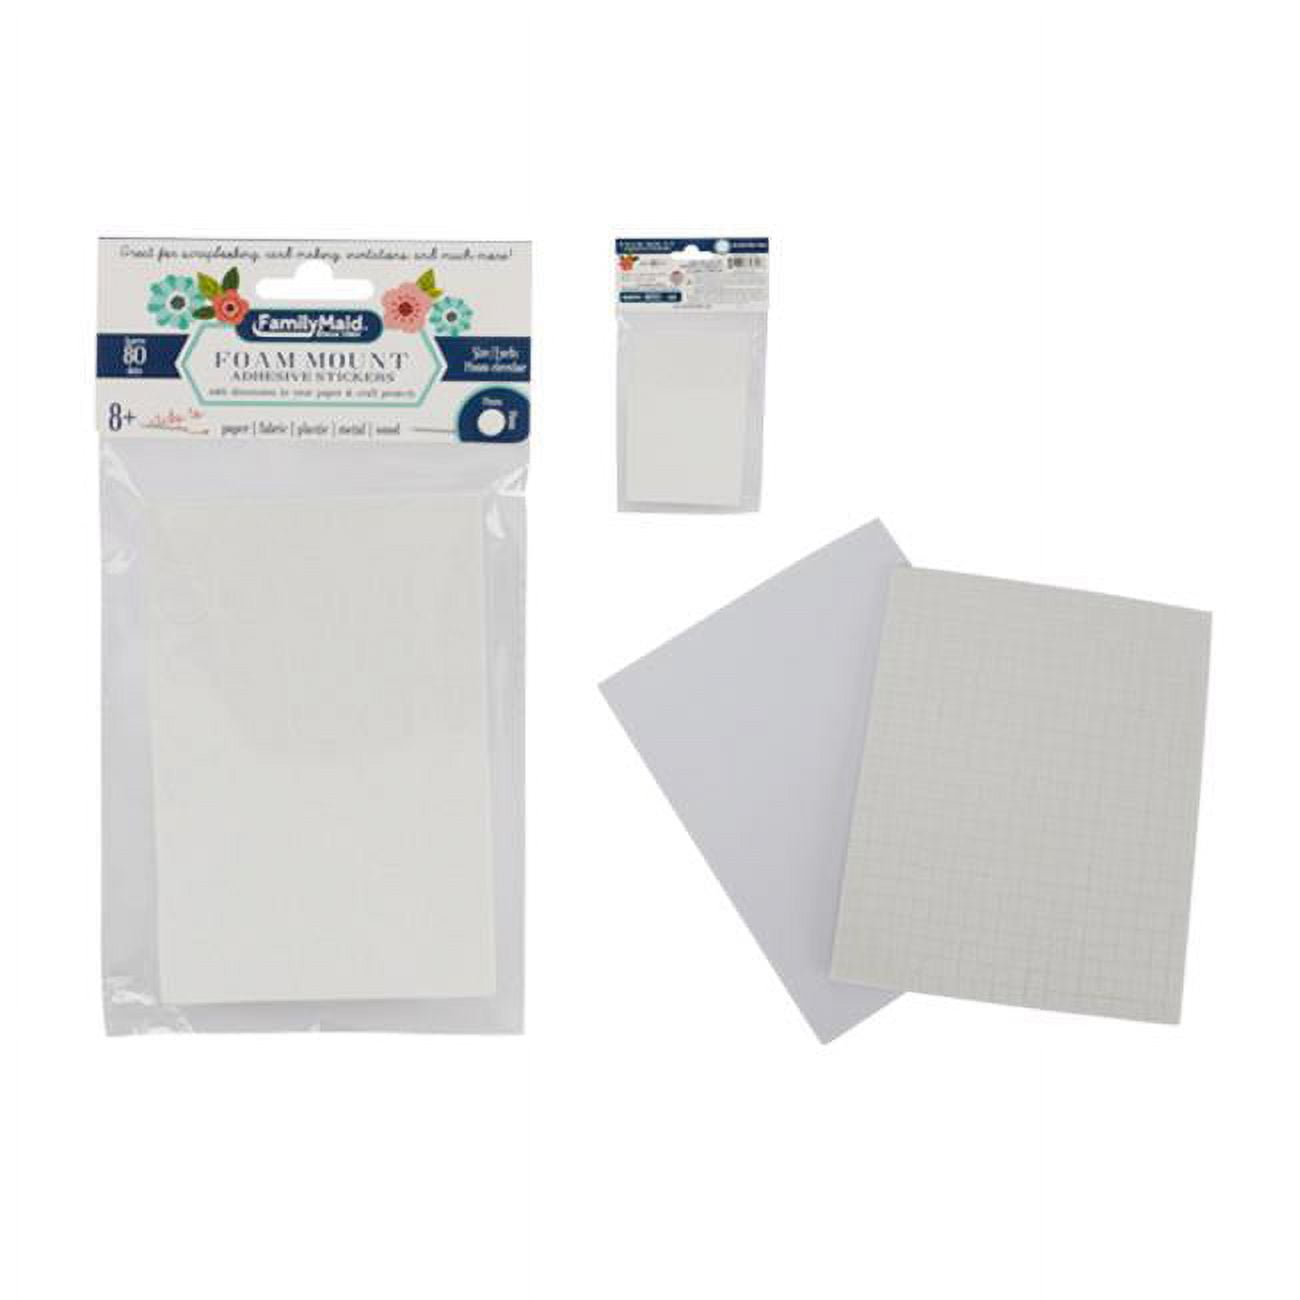 Picture of Familymaid 34324 14 mm Pop Dot Adhesive Sticker with 2 Sheet - 80 Piece